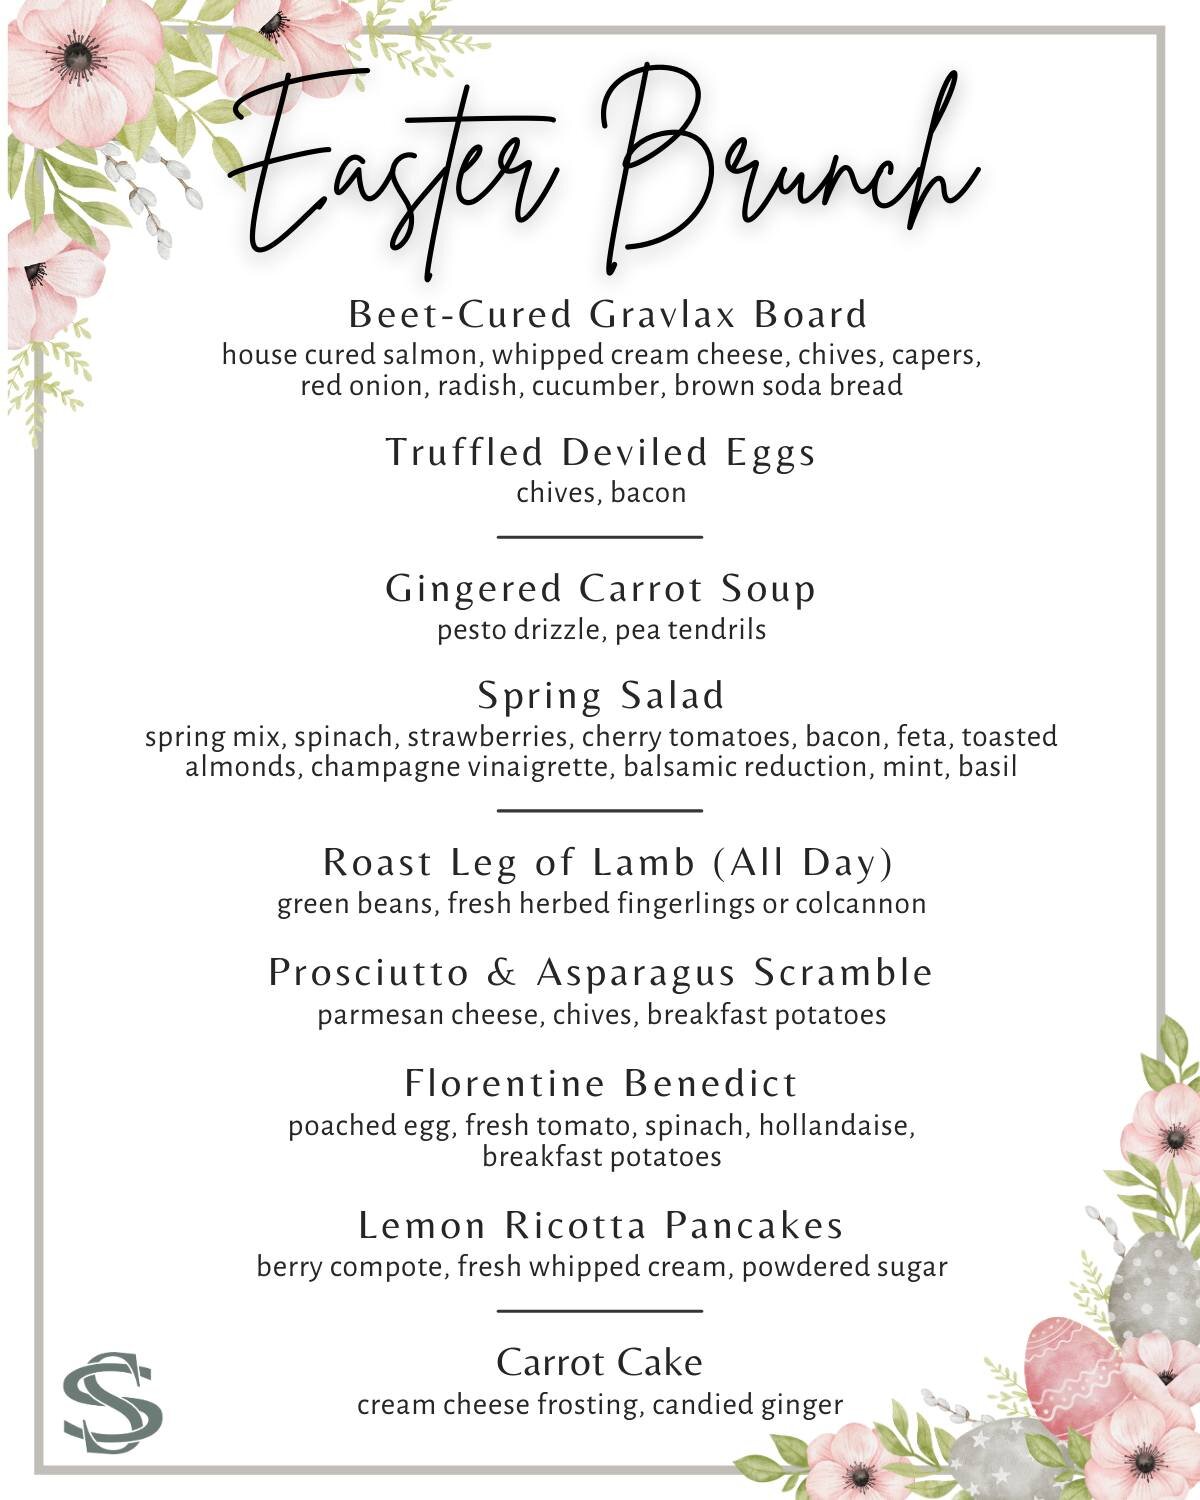 🌷 Hop into Easter Sunday with a brunch that's blooming with flavor from 10 AM to 2 PM! Indulge in our festive springtime dishes (gluten free and vegetarian options included!), vibrant non-alcoholic sips, or spirited Easter-themed cocktails. And, for